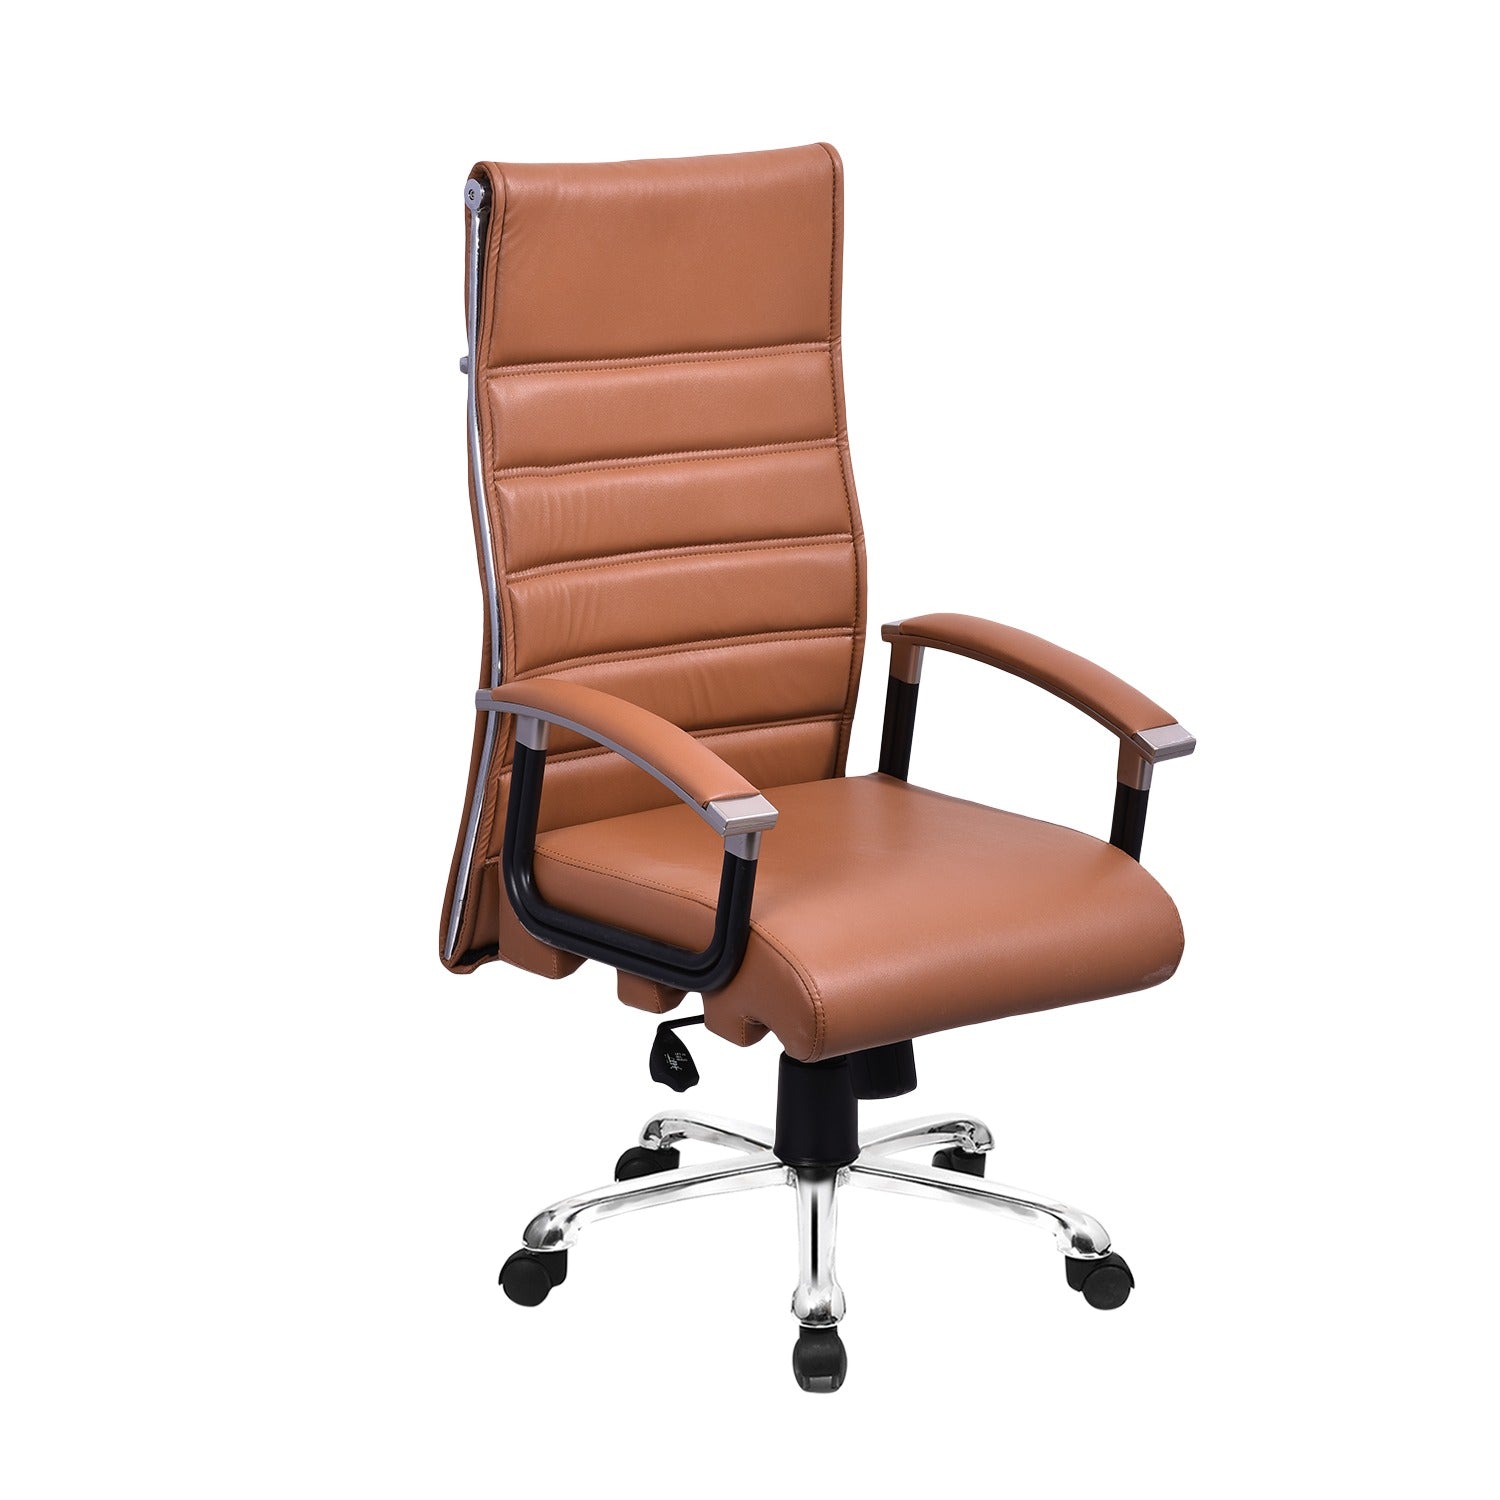 ZSE1034 High Back Chair by Zorin in Tan Color Zorin